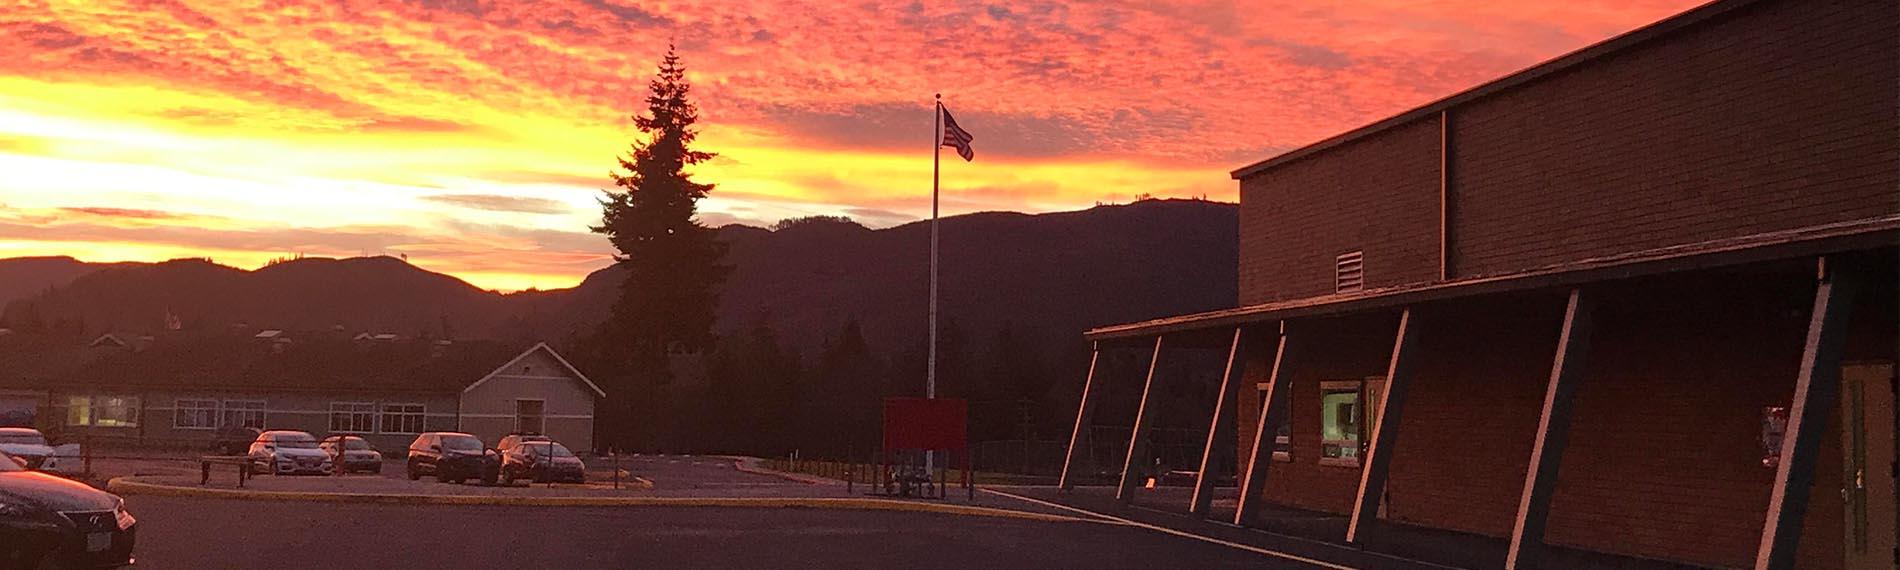 Sunset over the District Office parking lot, with flag